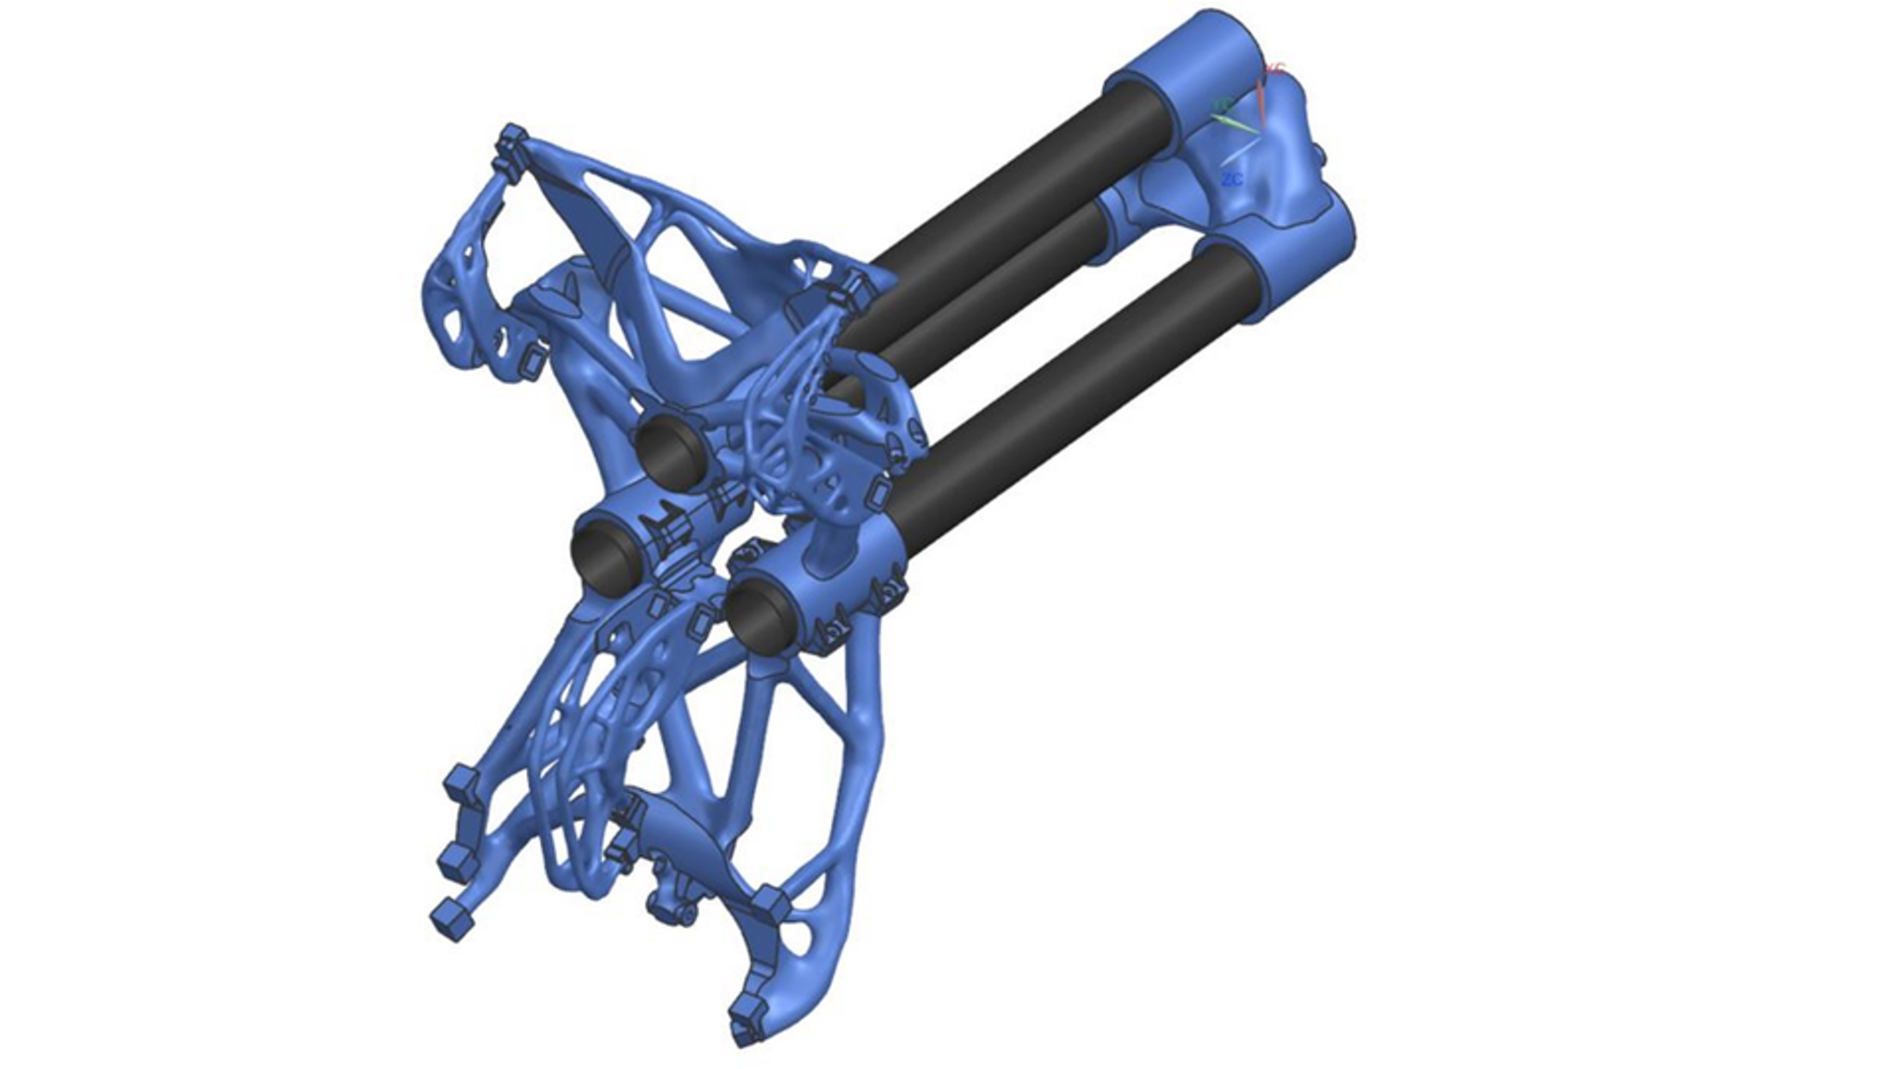 Designs with optimized topology can also make significant weight reductions possible in 3D printed robotic grippers. This ultimately makes robots more efficient, as well. Image: Siemens